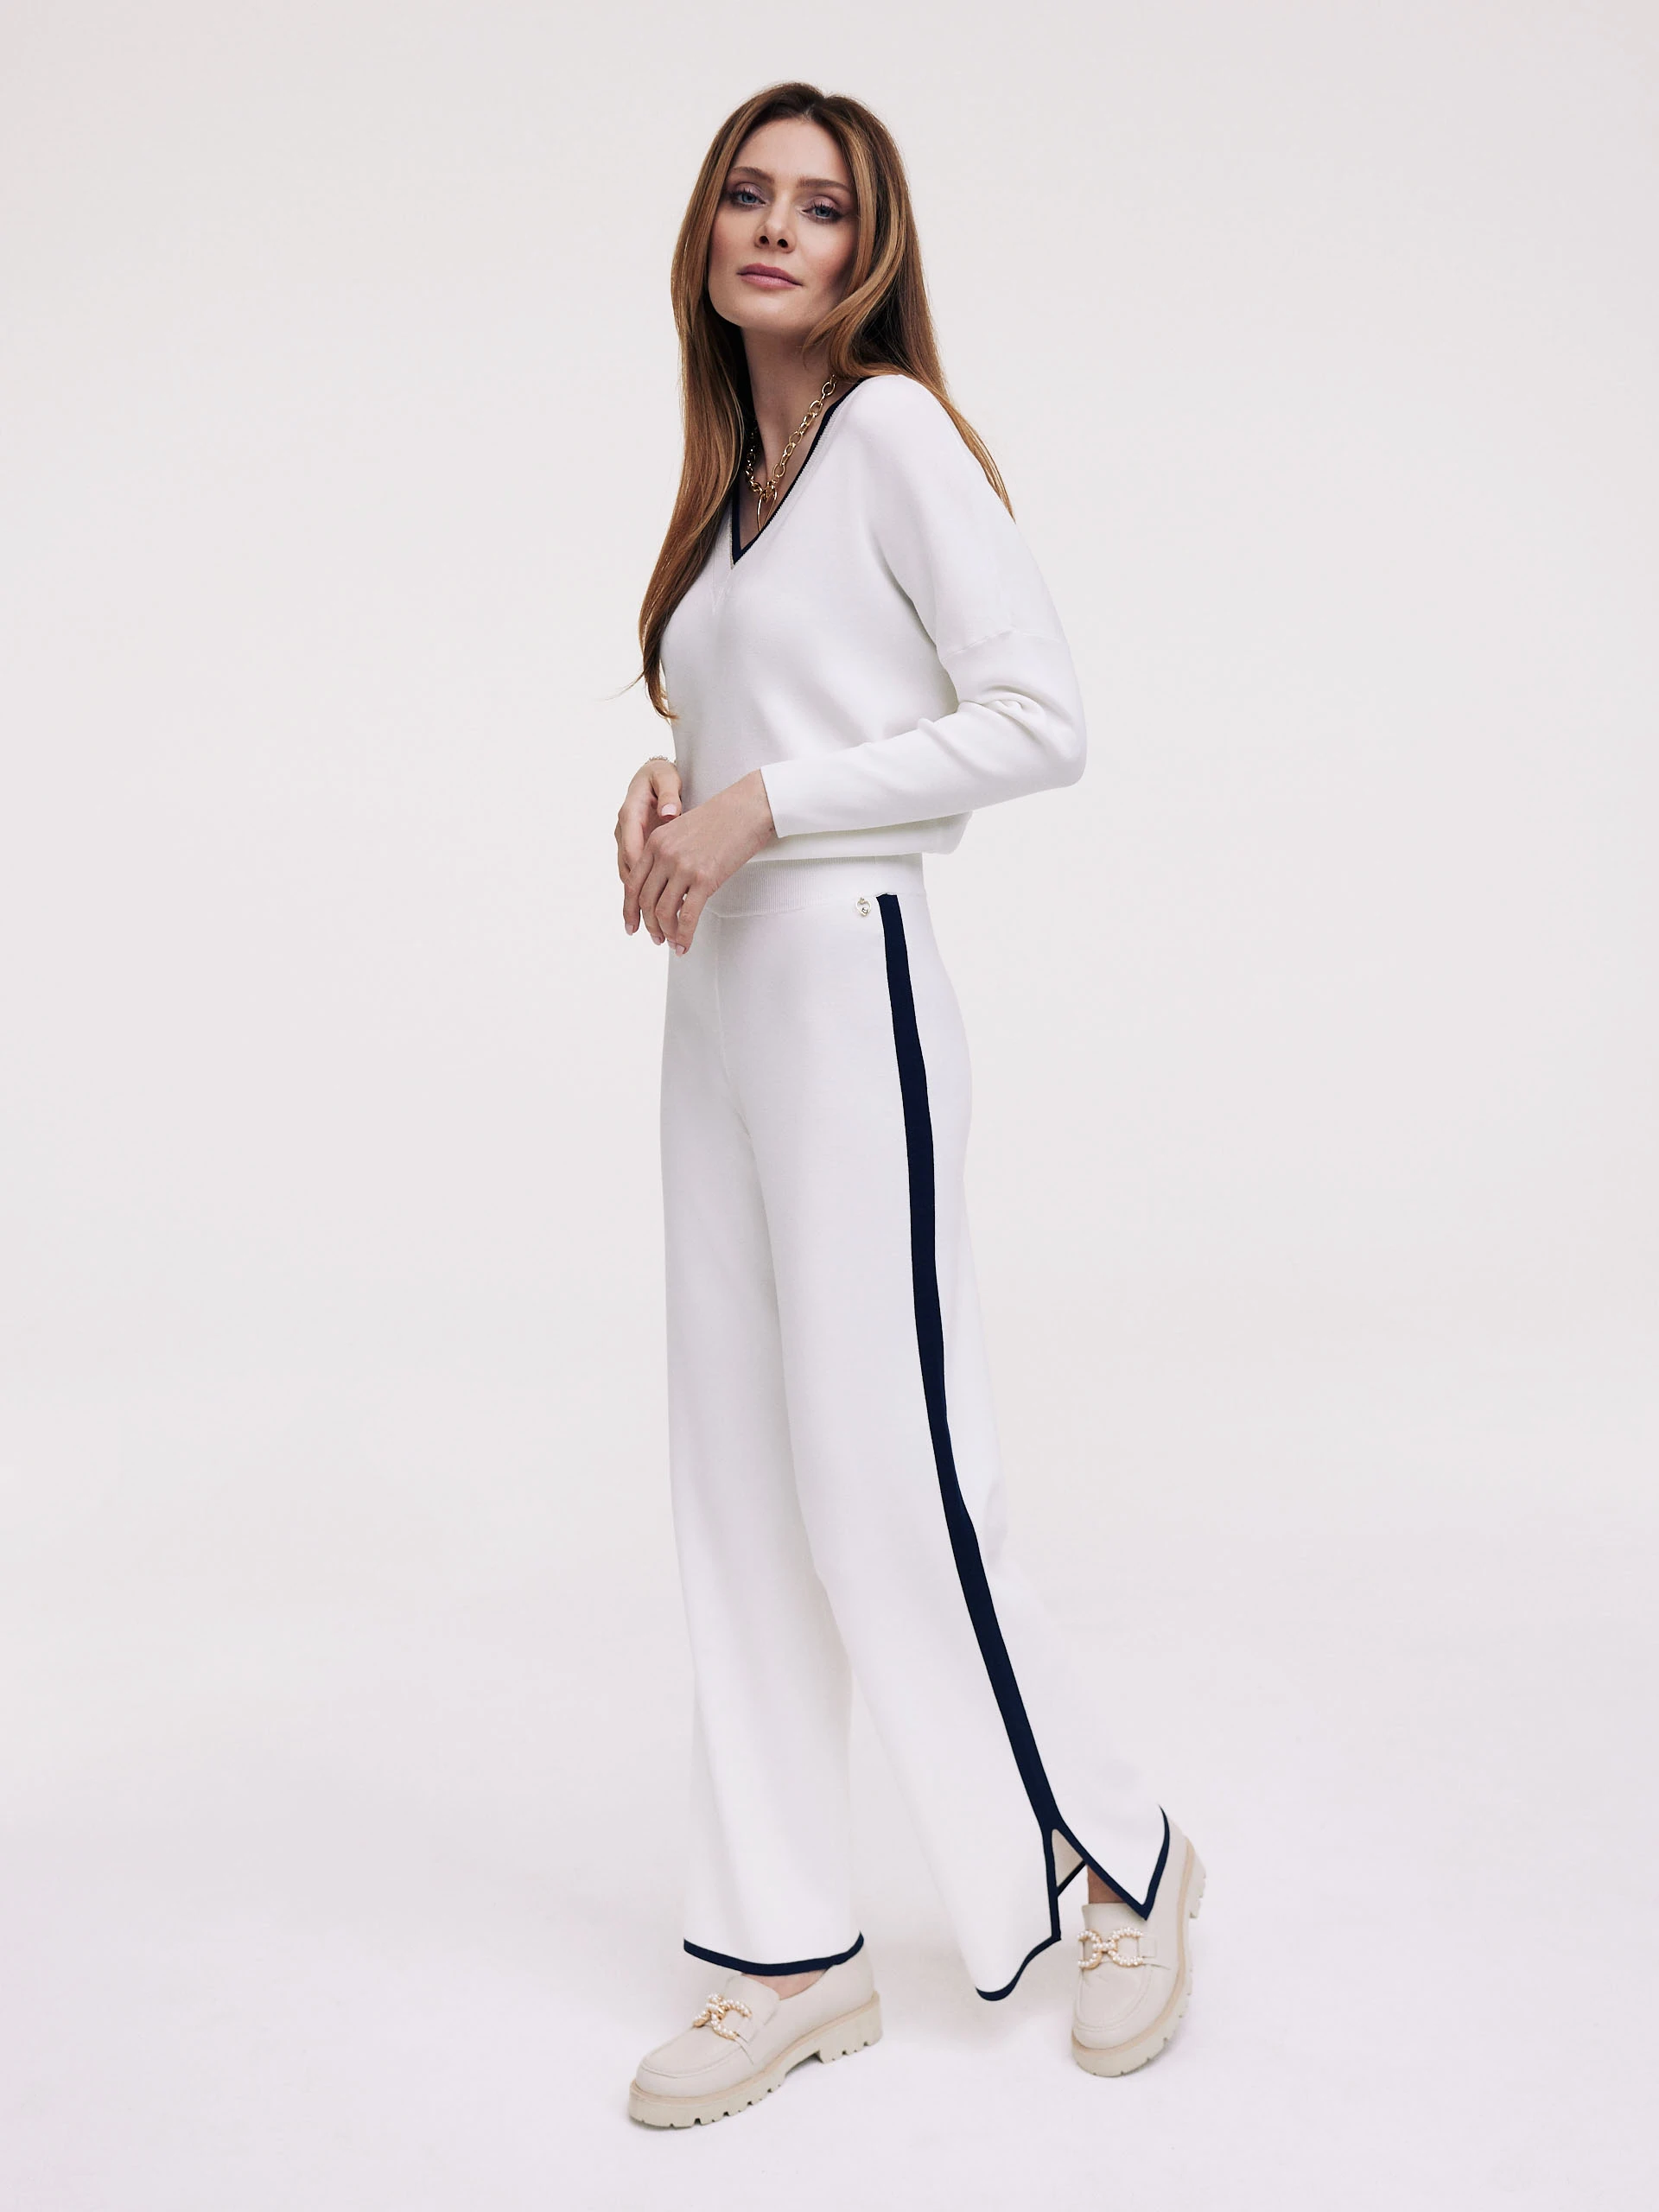 White pants with navy blue piping